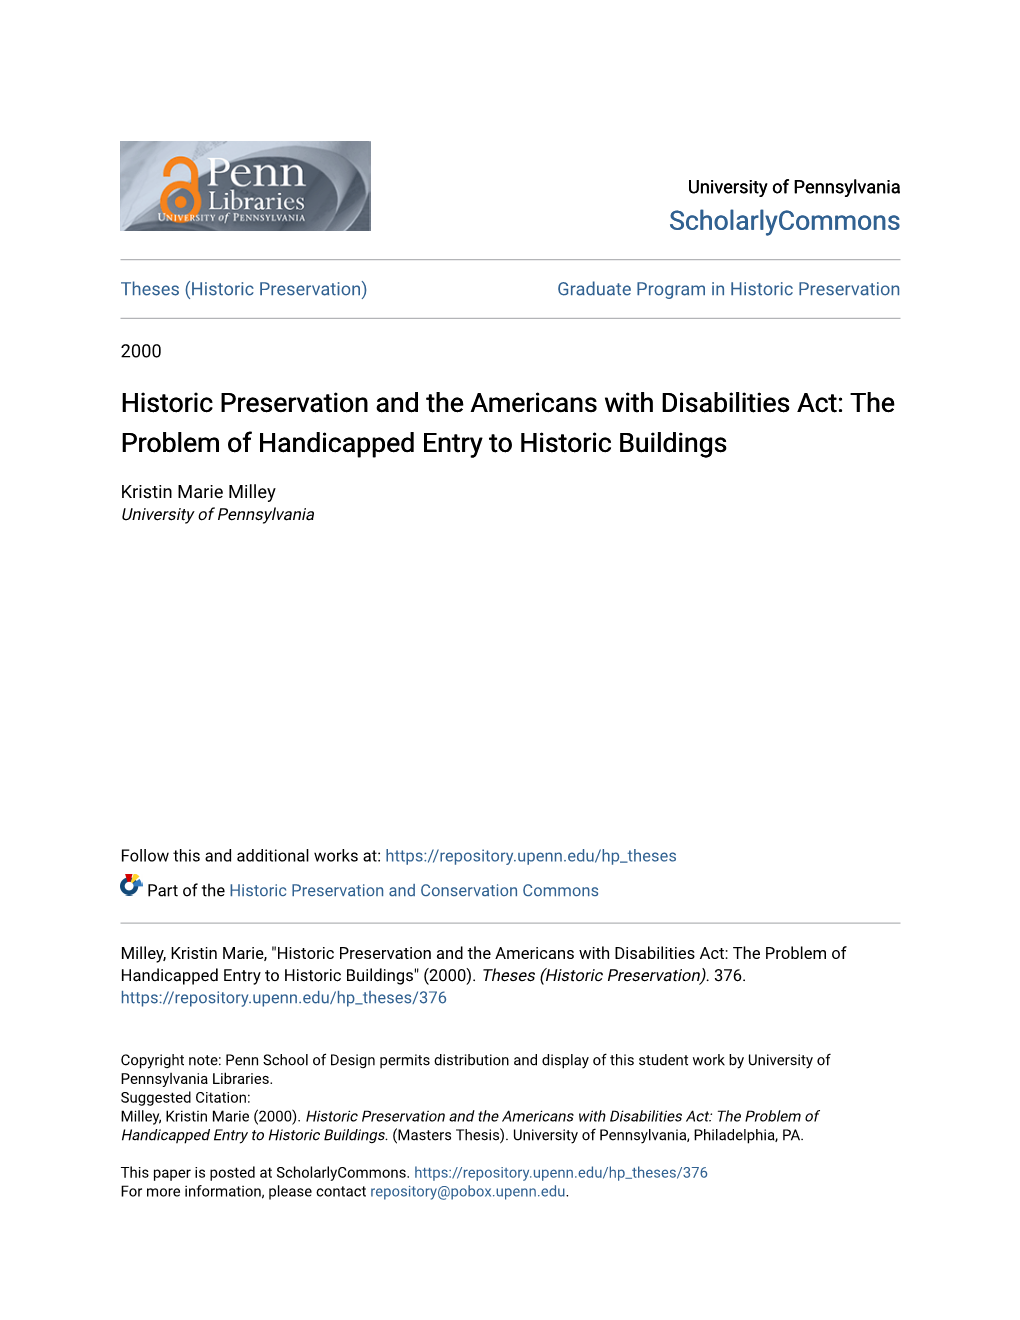 Historic Preservation and the Americans with Disabilities Act: the Problem of Handicapped Entry to Historic Buildings